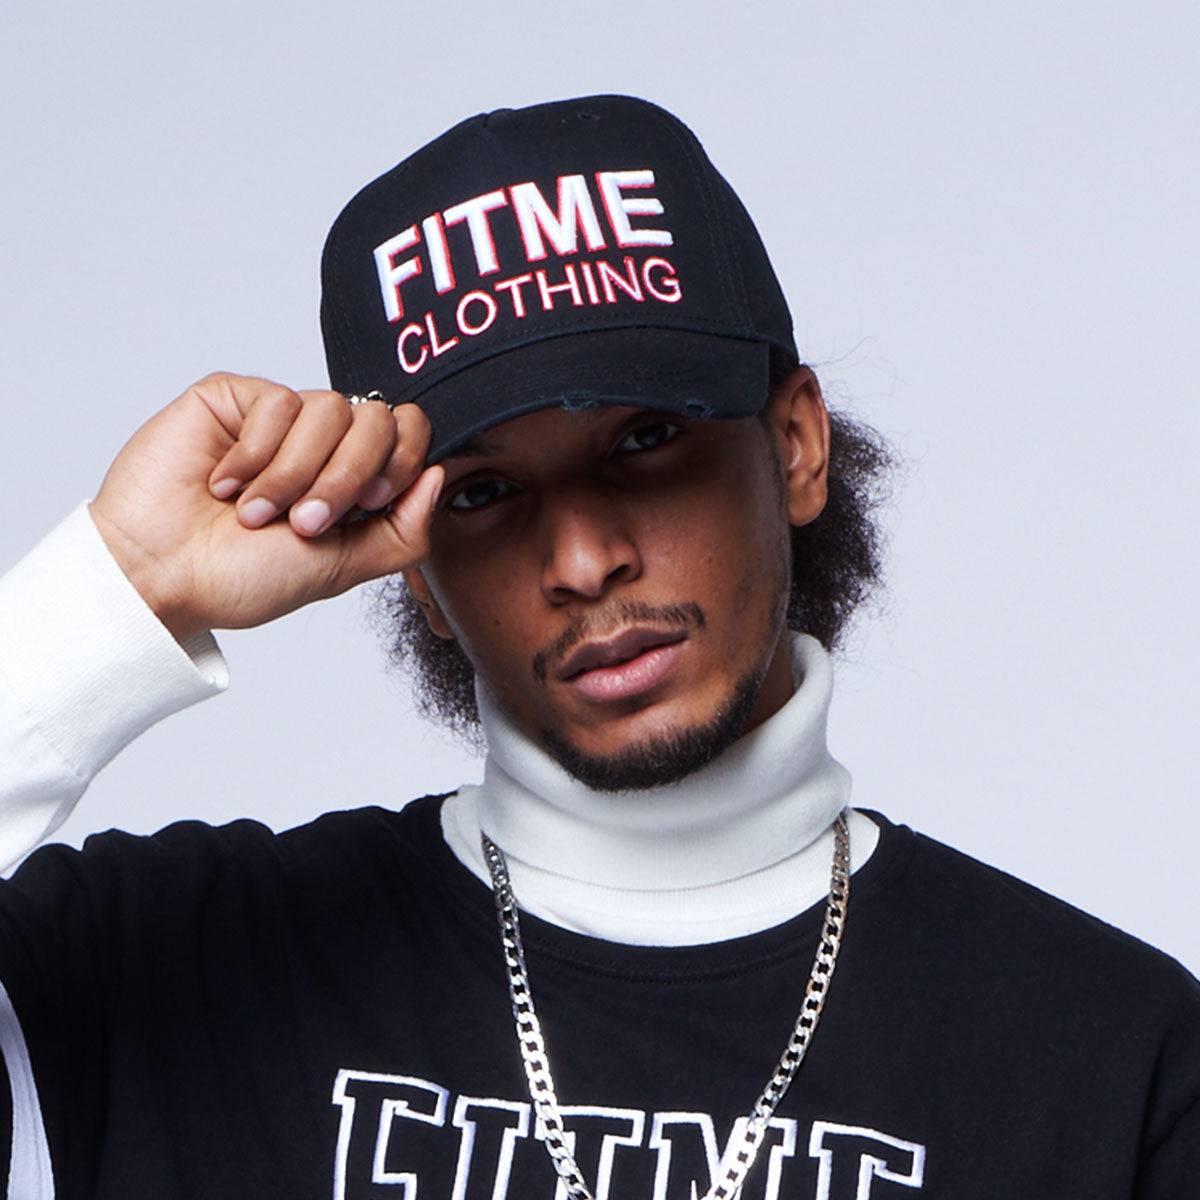 FitMe Clothing 3D Black Distressed Cap - FitMe Clothing